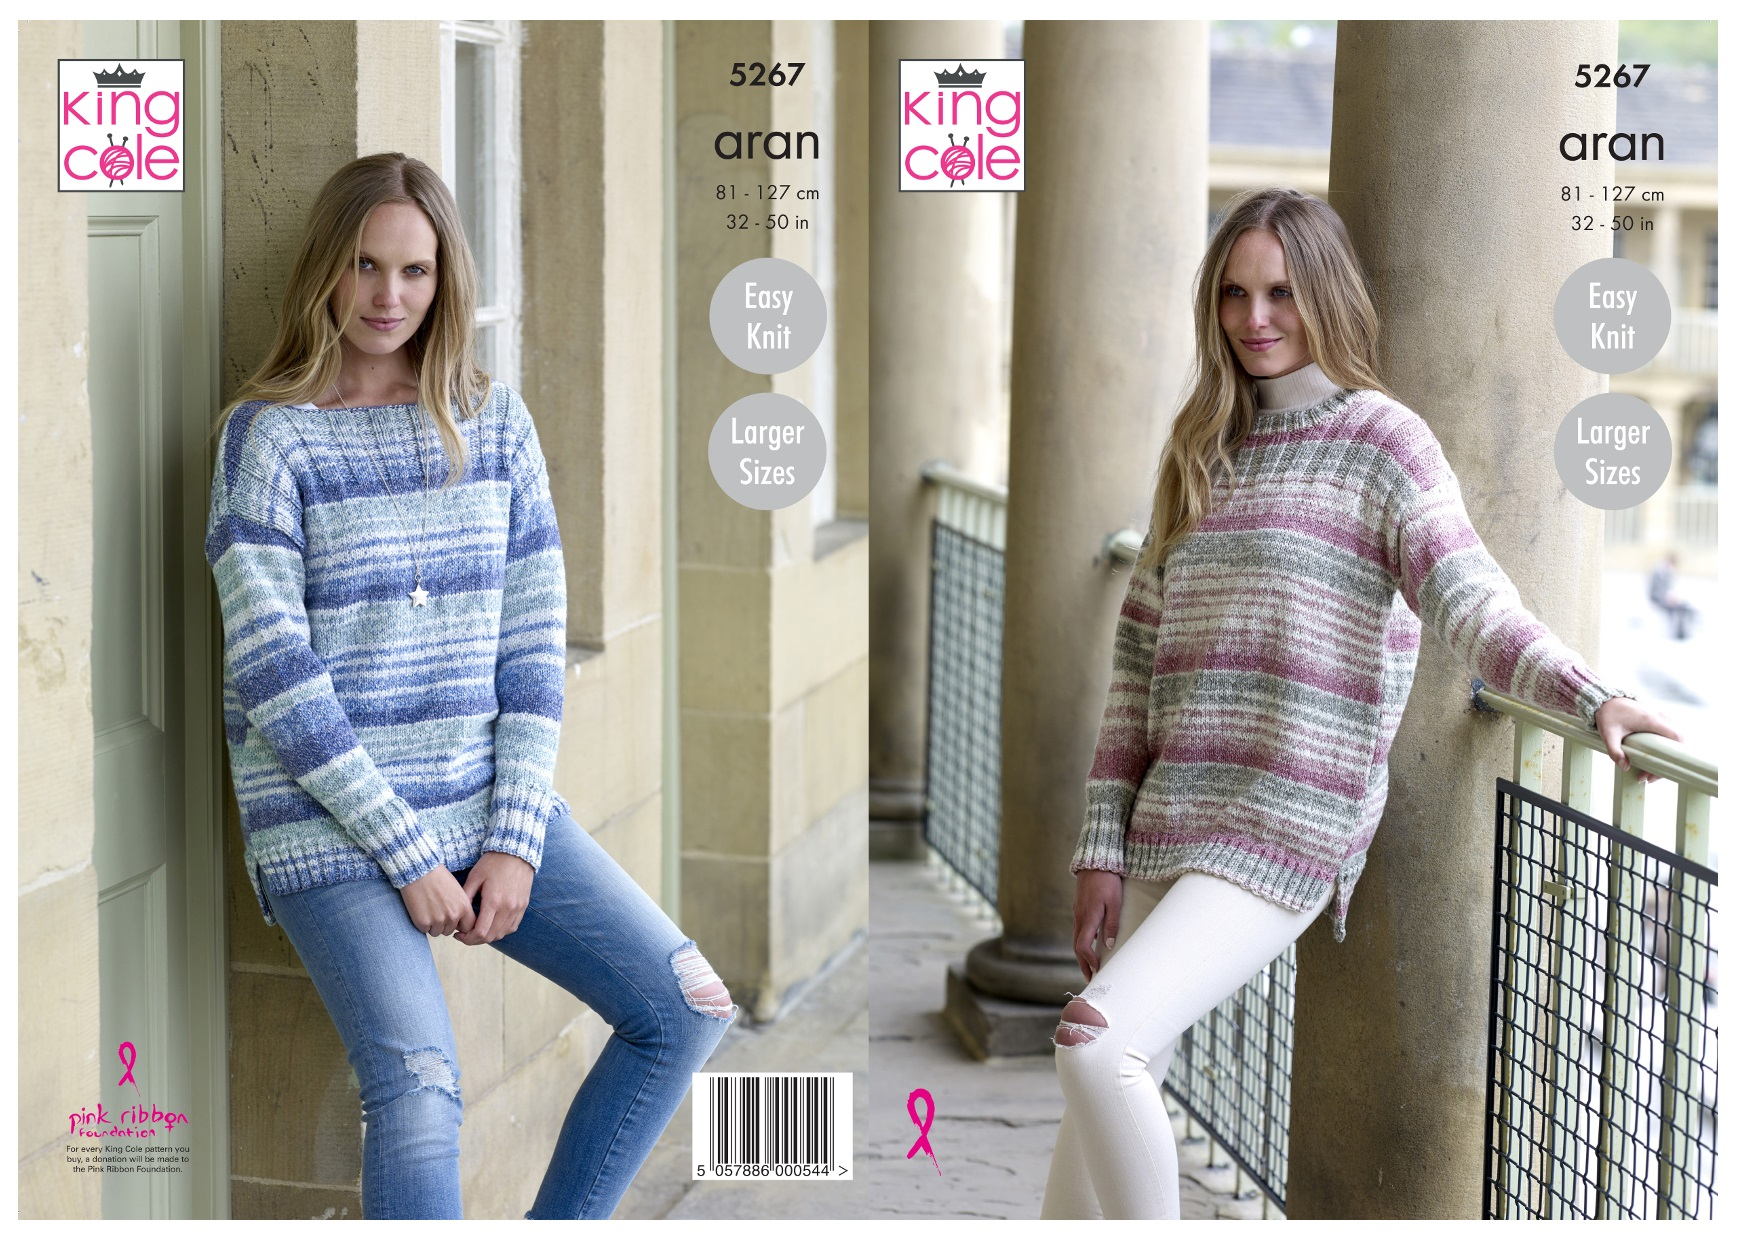 Jumper Knitting Patterns Details About Easy Knit Womens Round Or Boat Neck Jumper Knitting Pattern King Cole Aran 5267